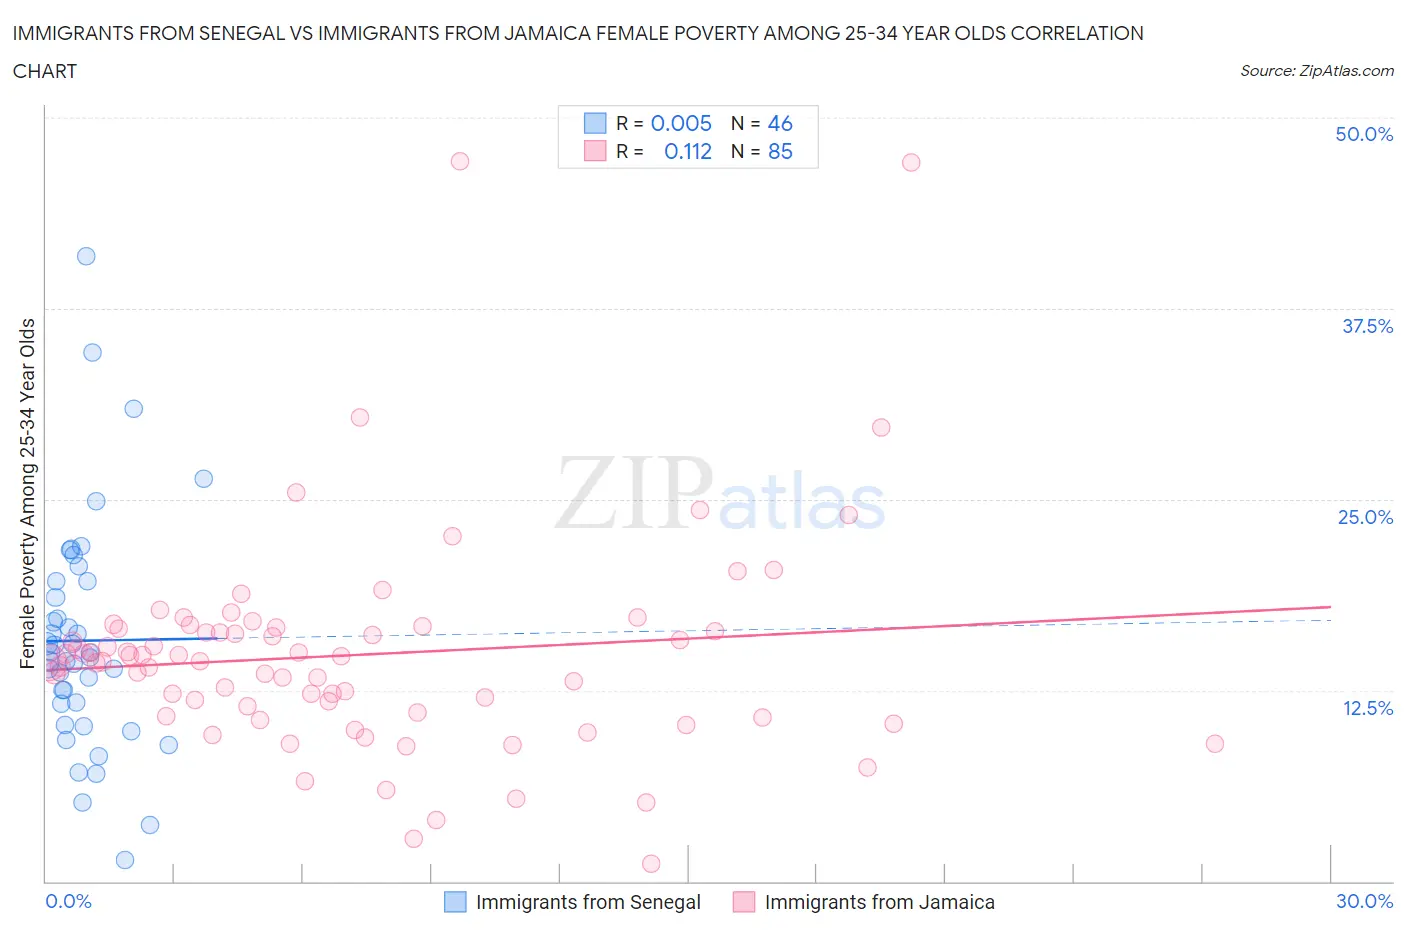 Immigrants from Senegal vs Immigrants from Jamaica Female Poverty Among 25-34 Year Olds